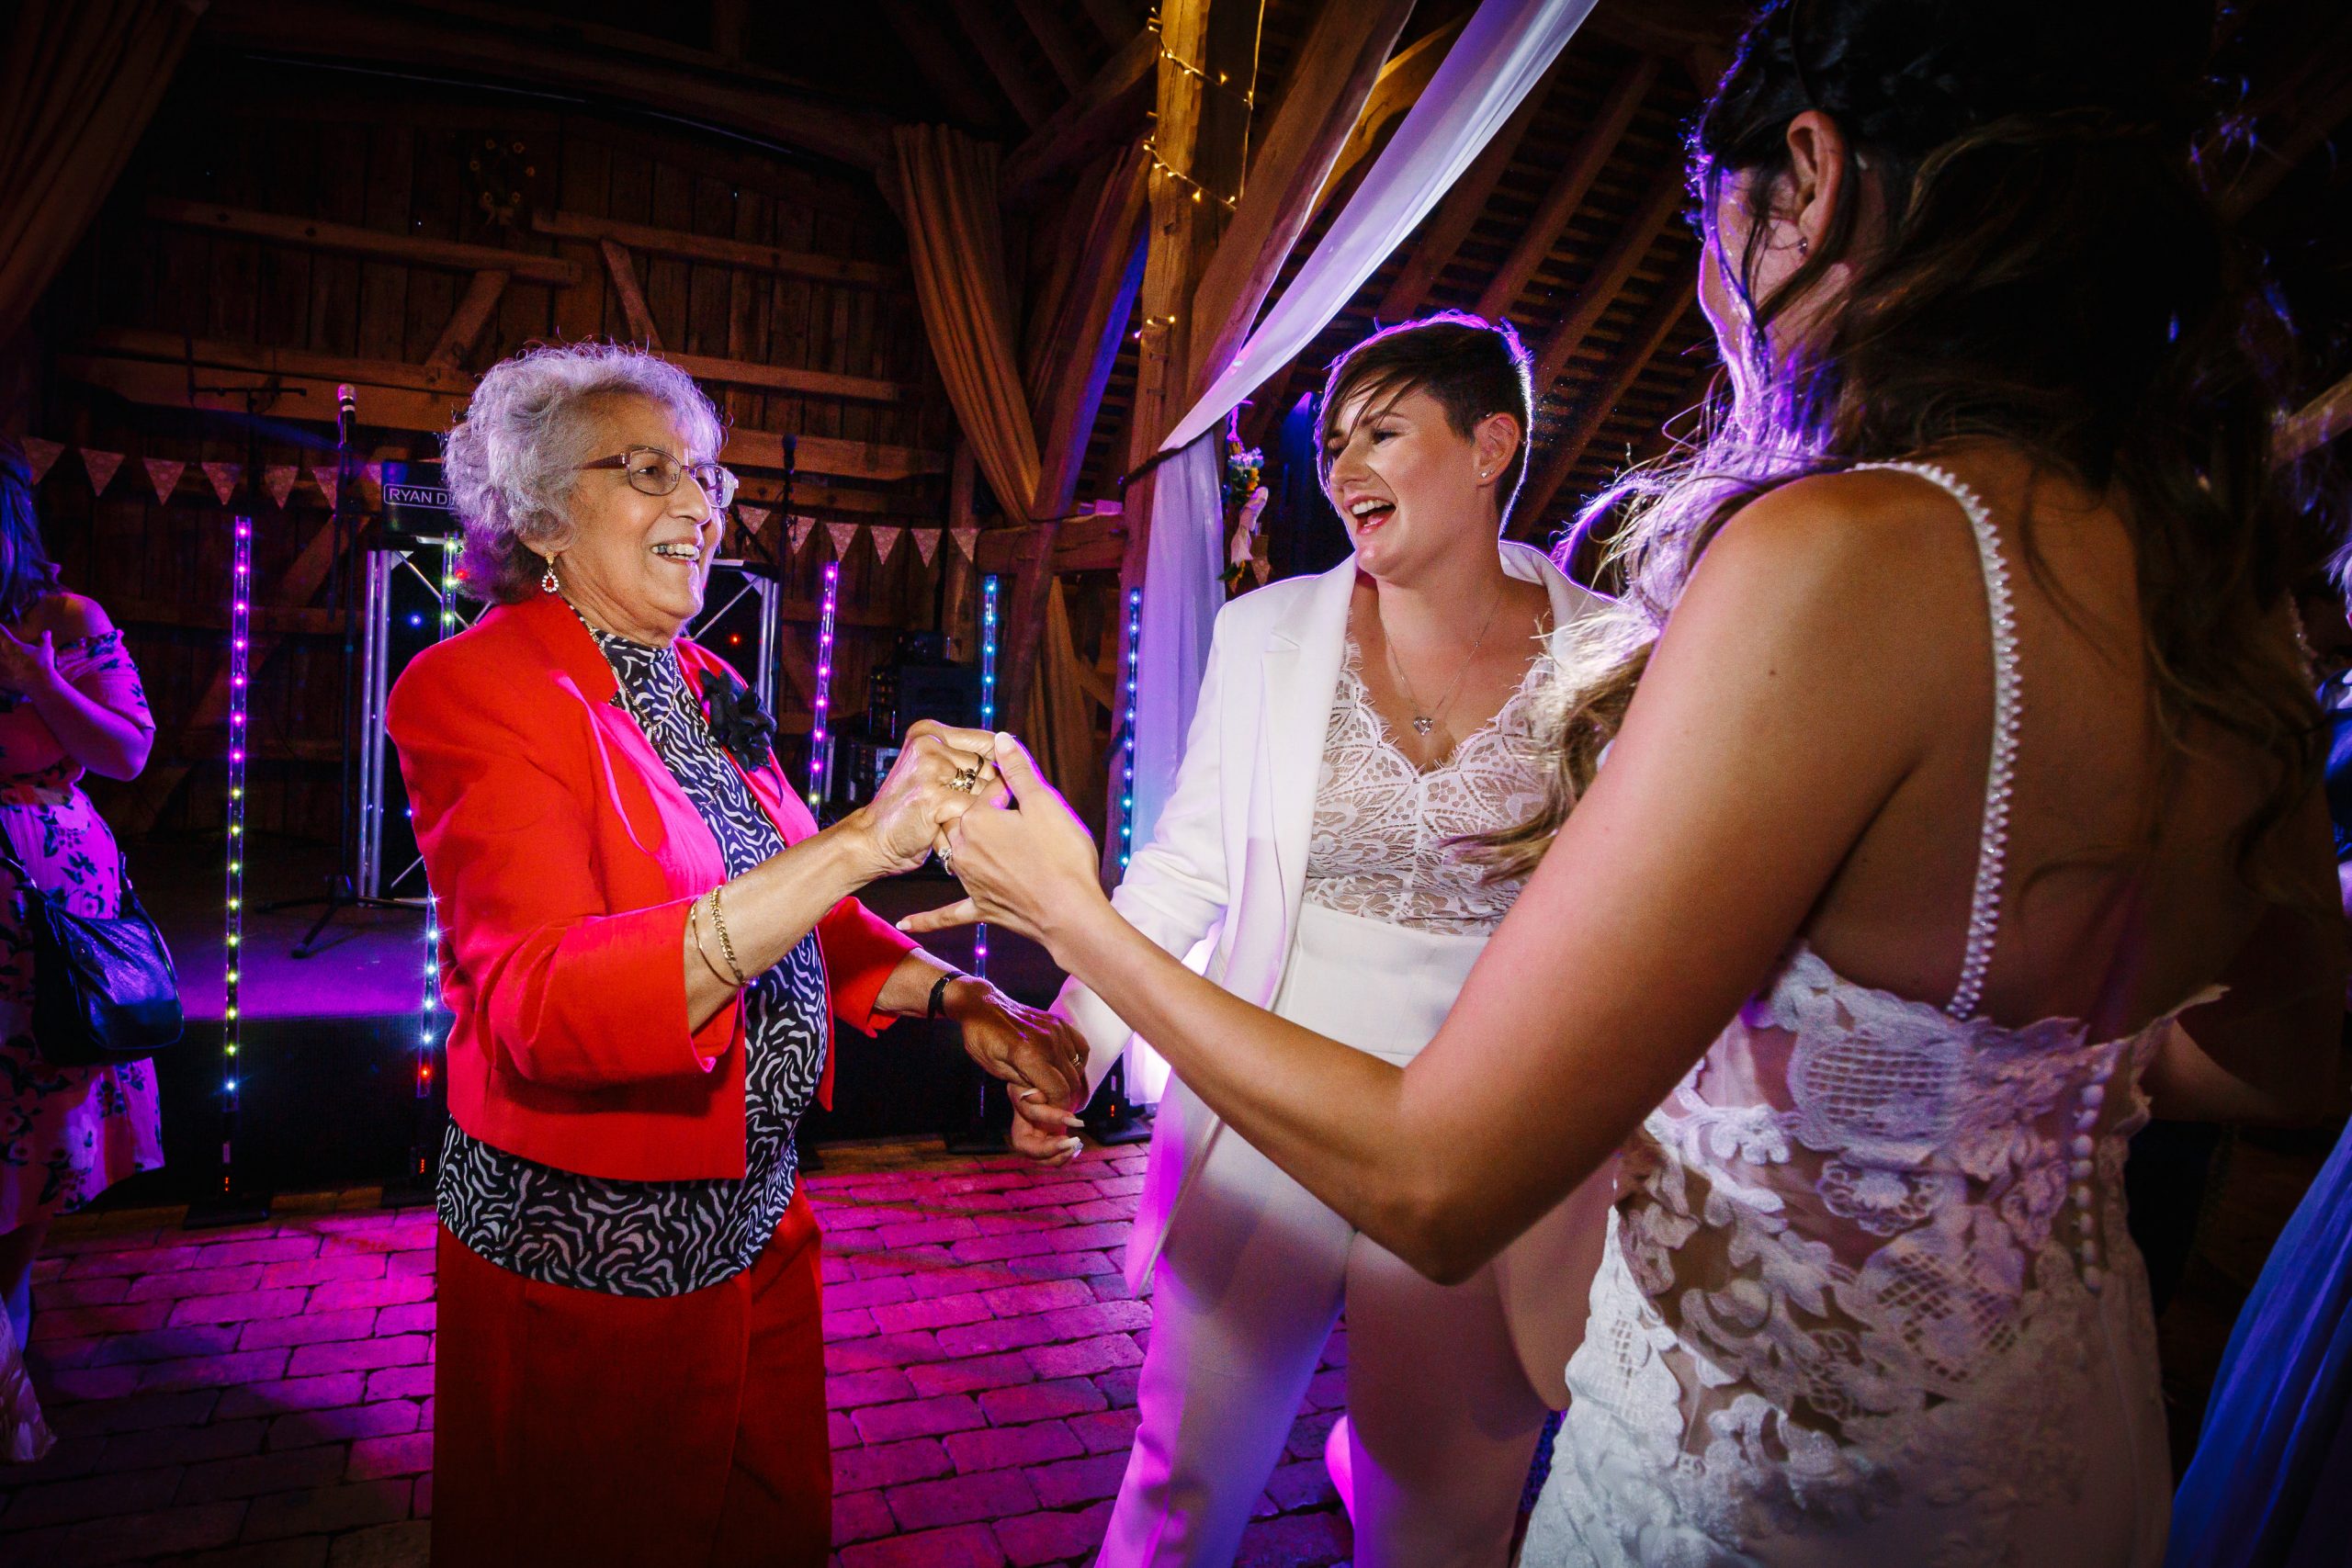 LGBTQ wedding party brides dancing with nan at gildings barns newdigate natural unposed candid wedding photography by LGBTQ_friendly documentary wedding photographer surrey sussex